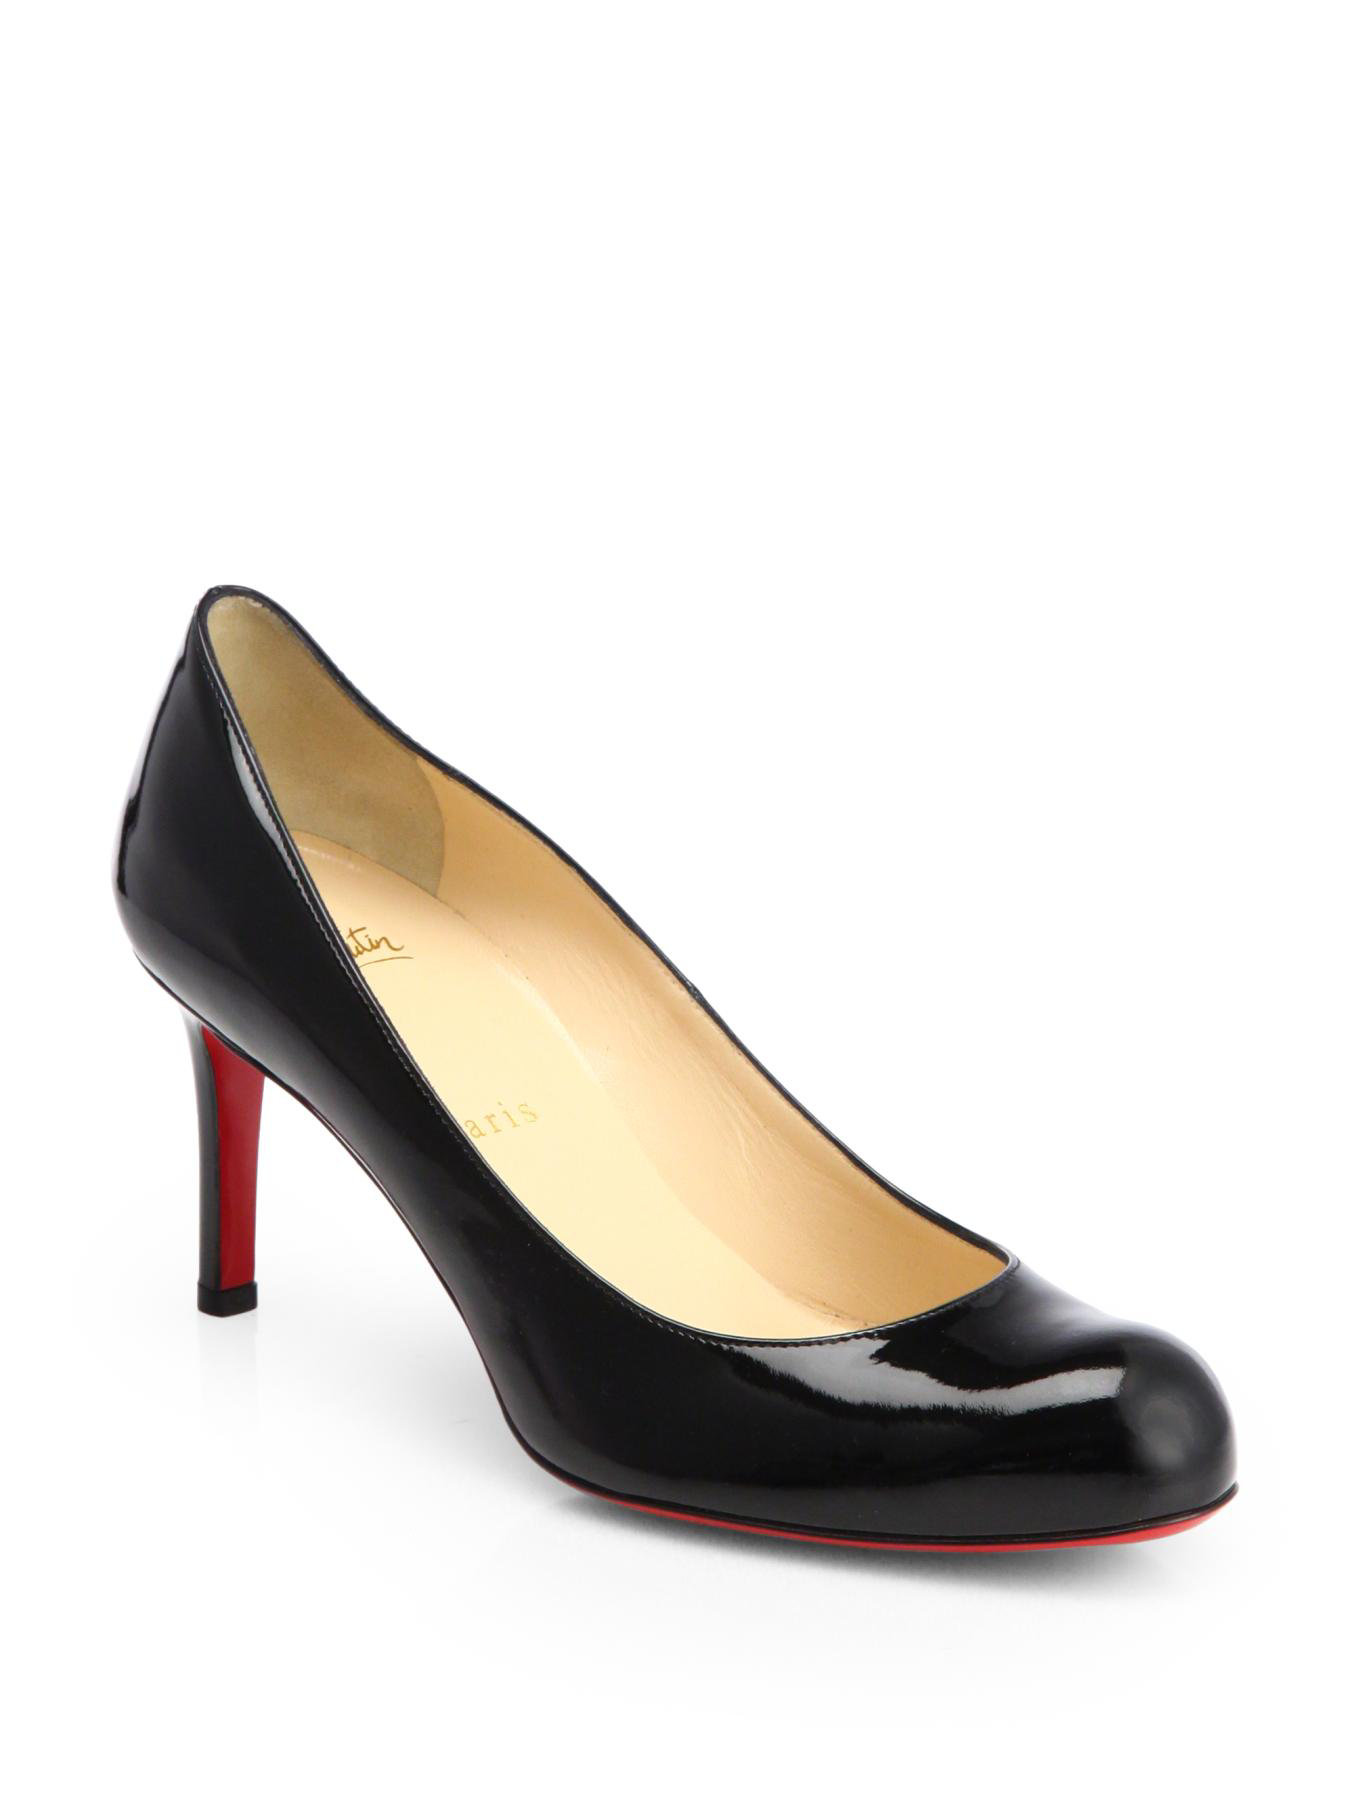 Christian louboutin Simple 70mm Patent Leather Pumps in Black | Lyst